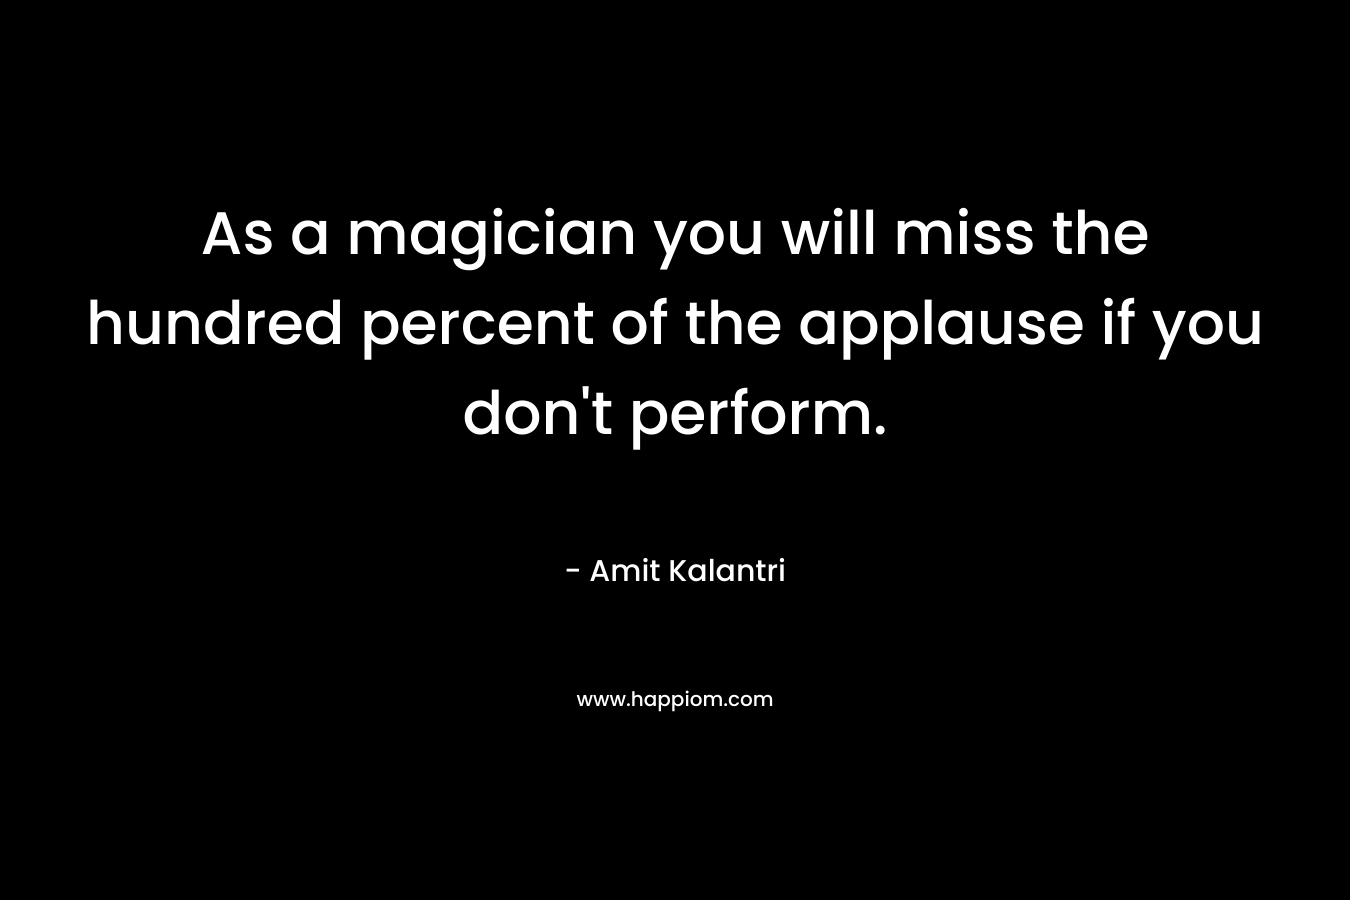 As a magician you will miss the hundred percent of the applause if you don't perform.